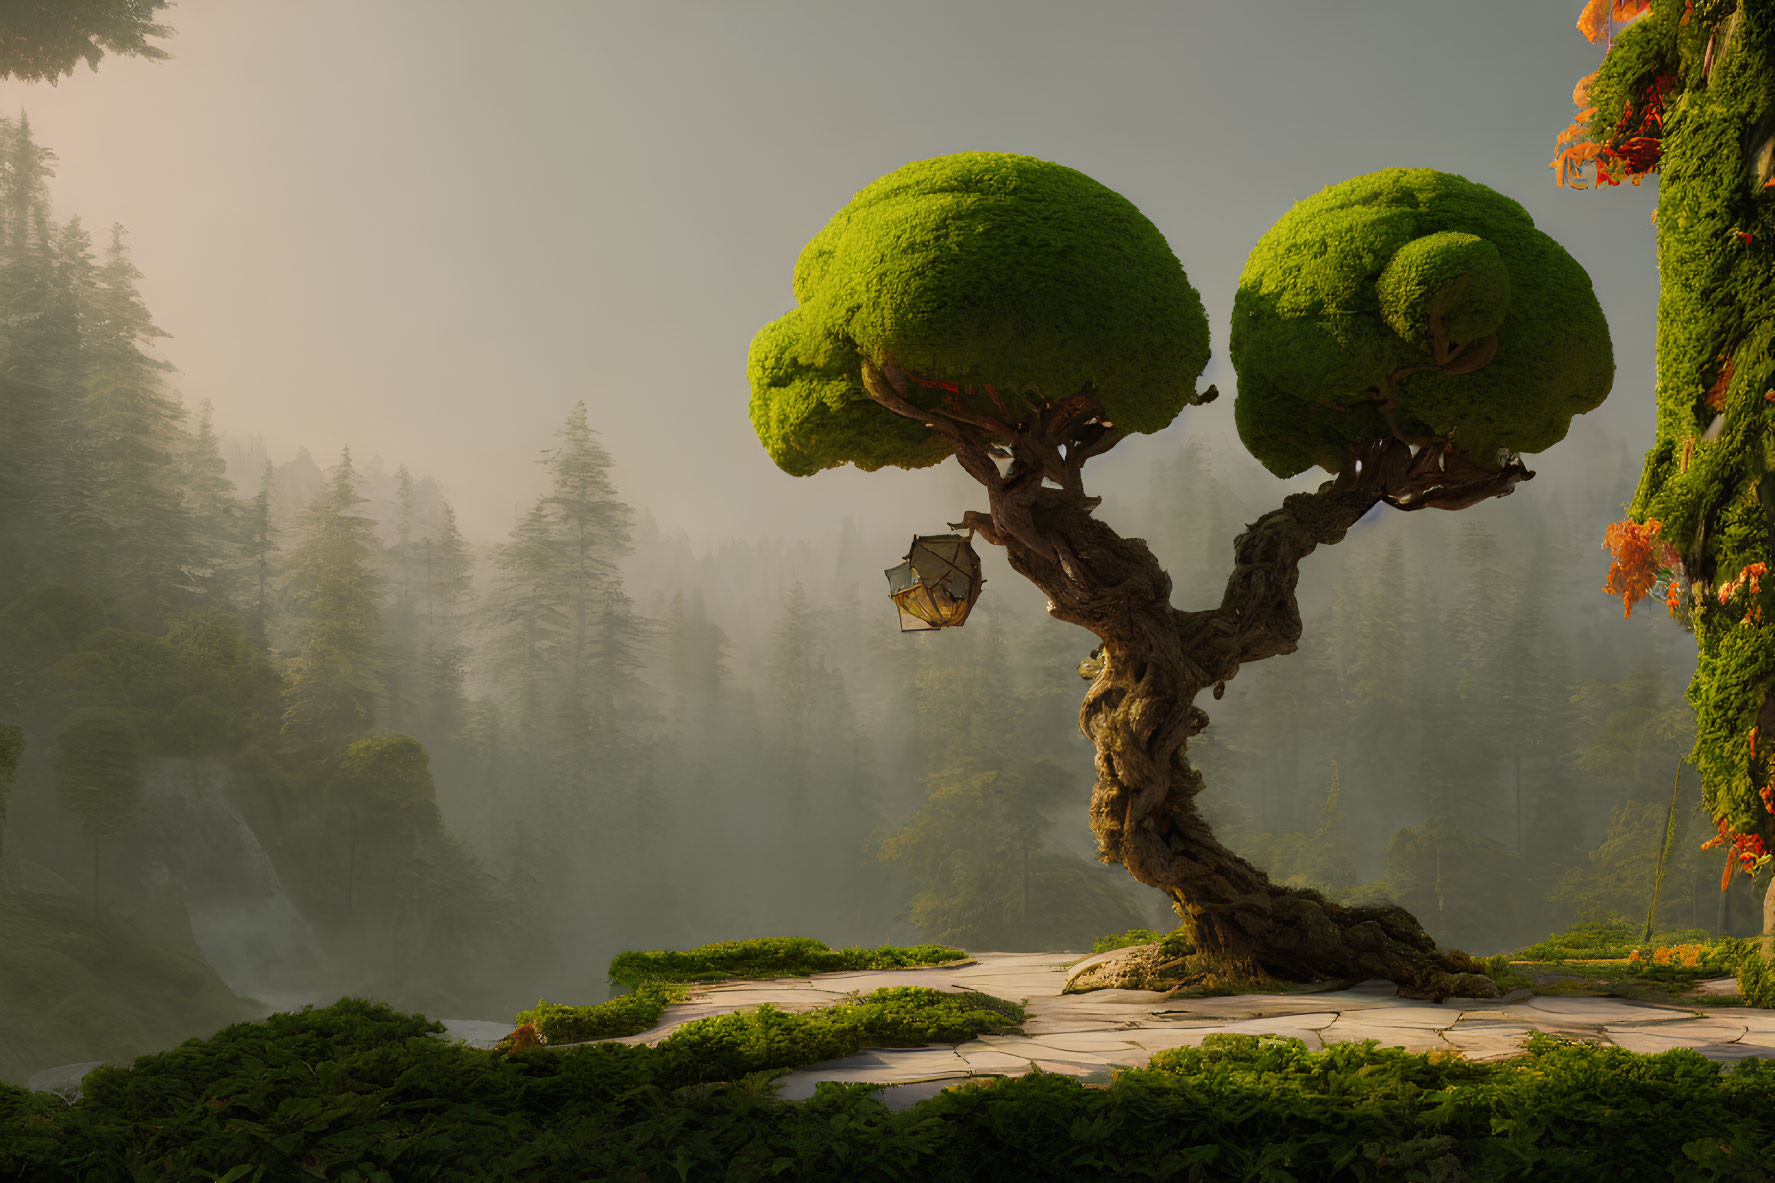 Whimsical tree with thick trunk and bushy canopies on hill overlooking misty forest